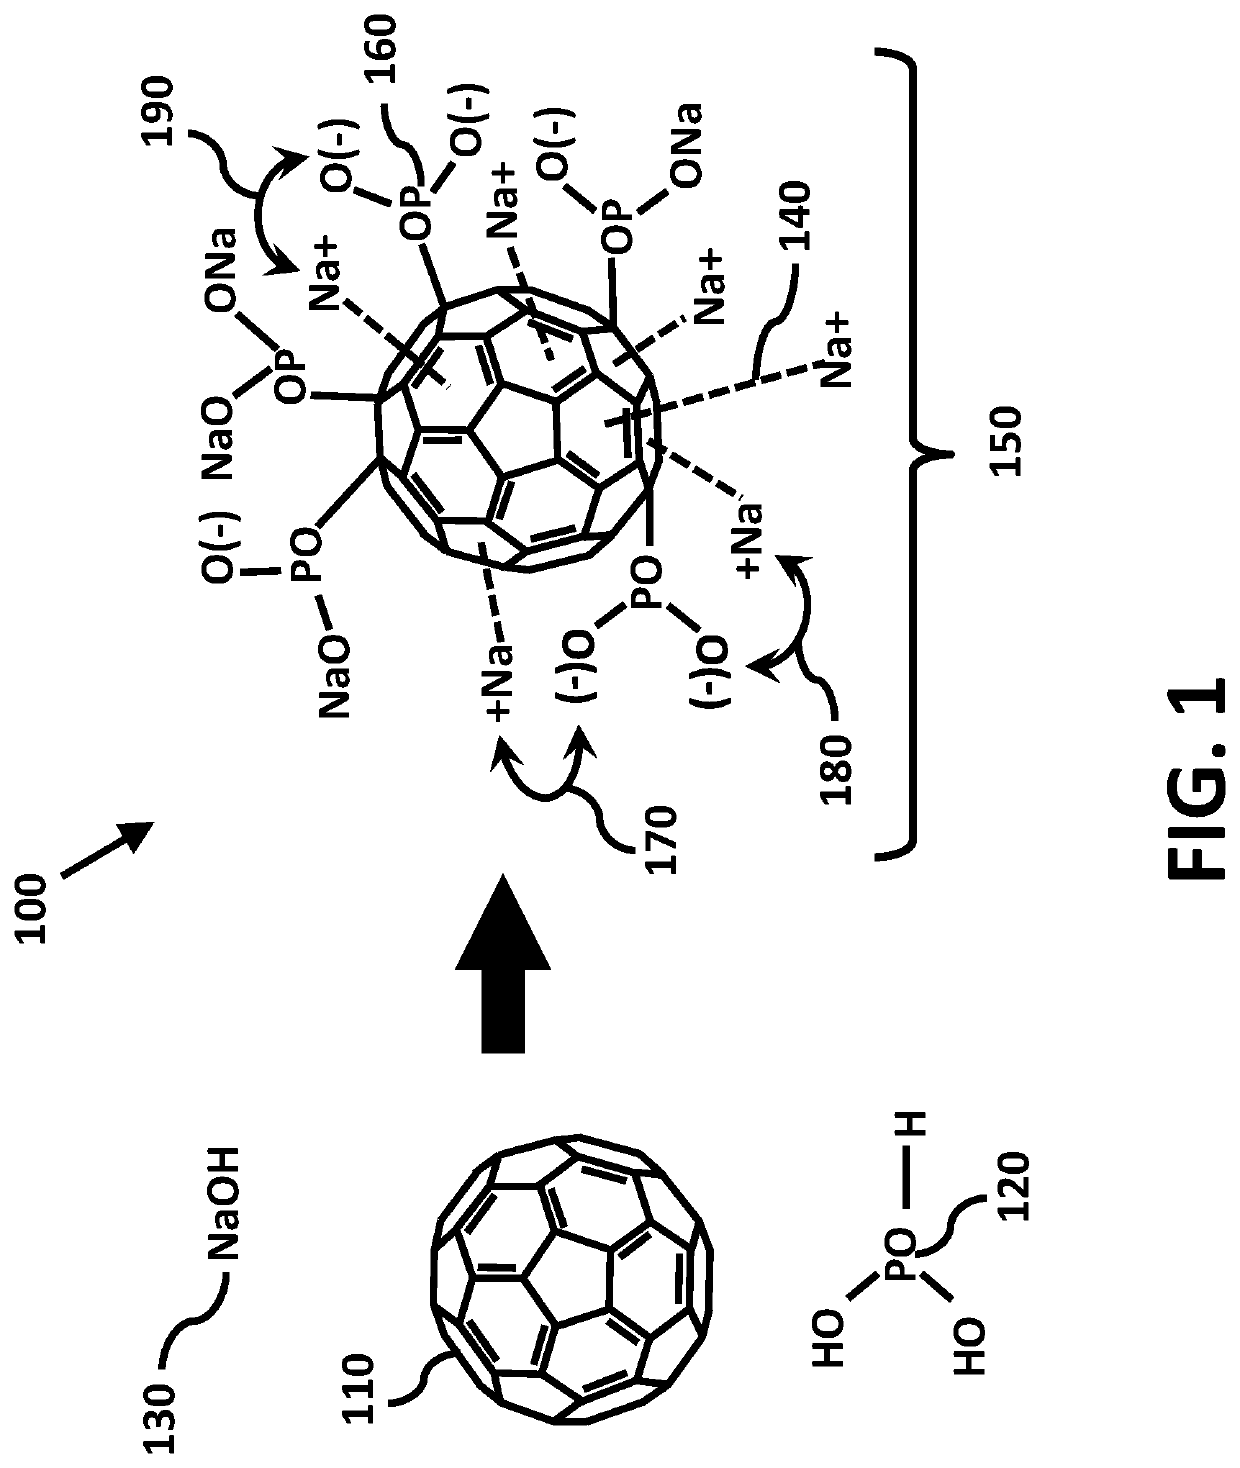 Antimicrobial nano-surfactant and methods